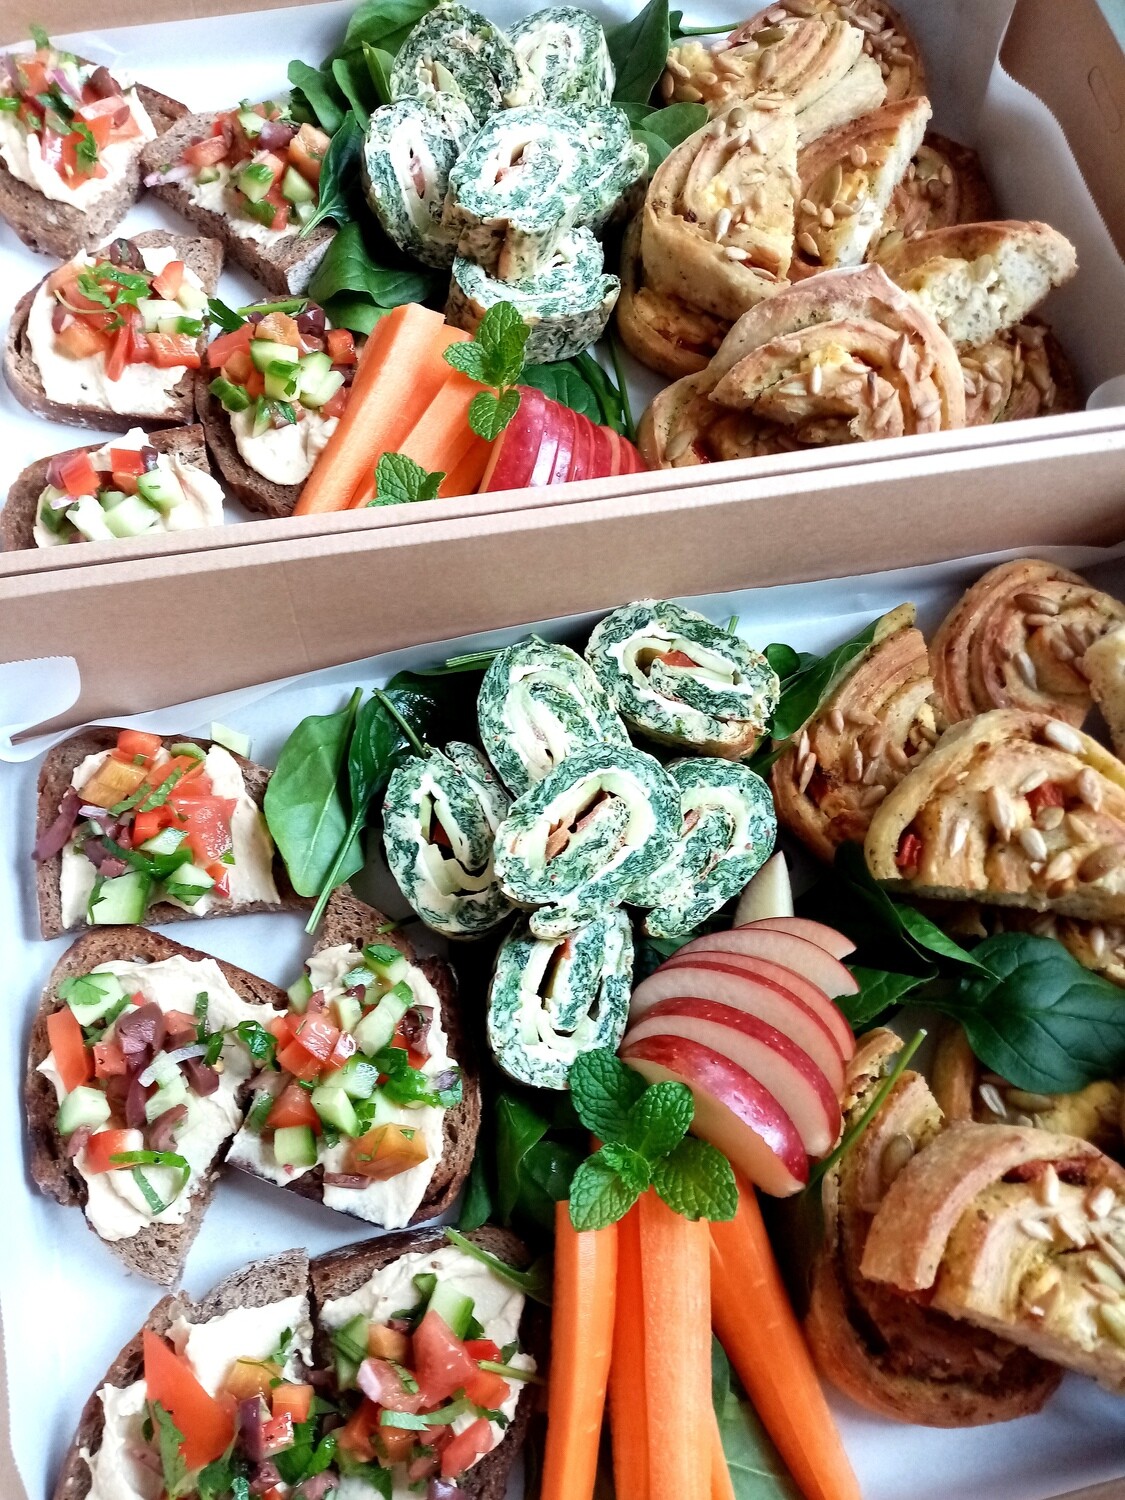 VEGETARIAN DELIGHT PLATTER for five people. With savoury scrolls, sourdough rye bruschetta, oven omelette roll. Requires two days notice please.